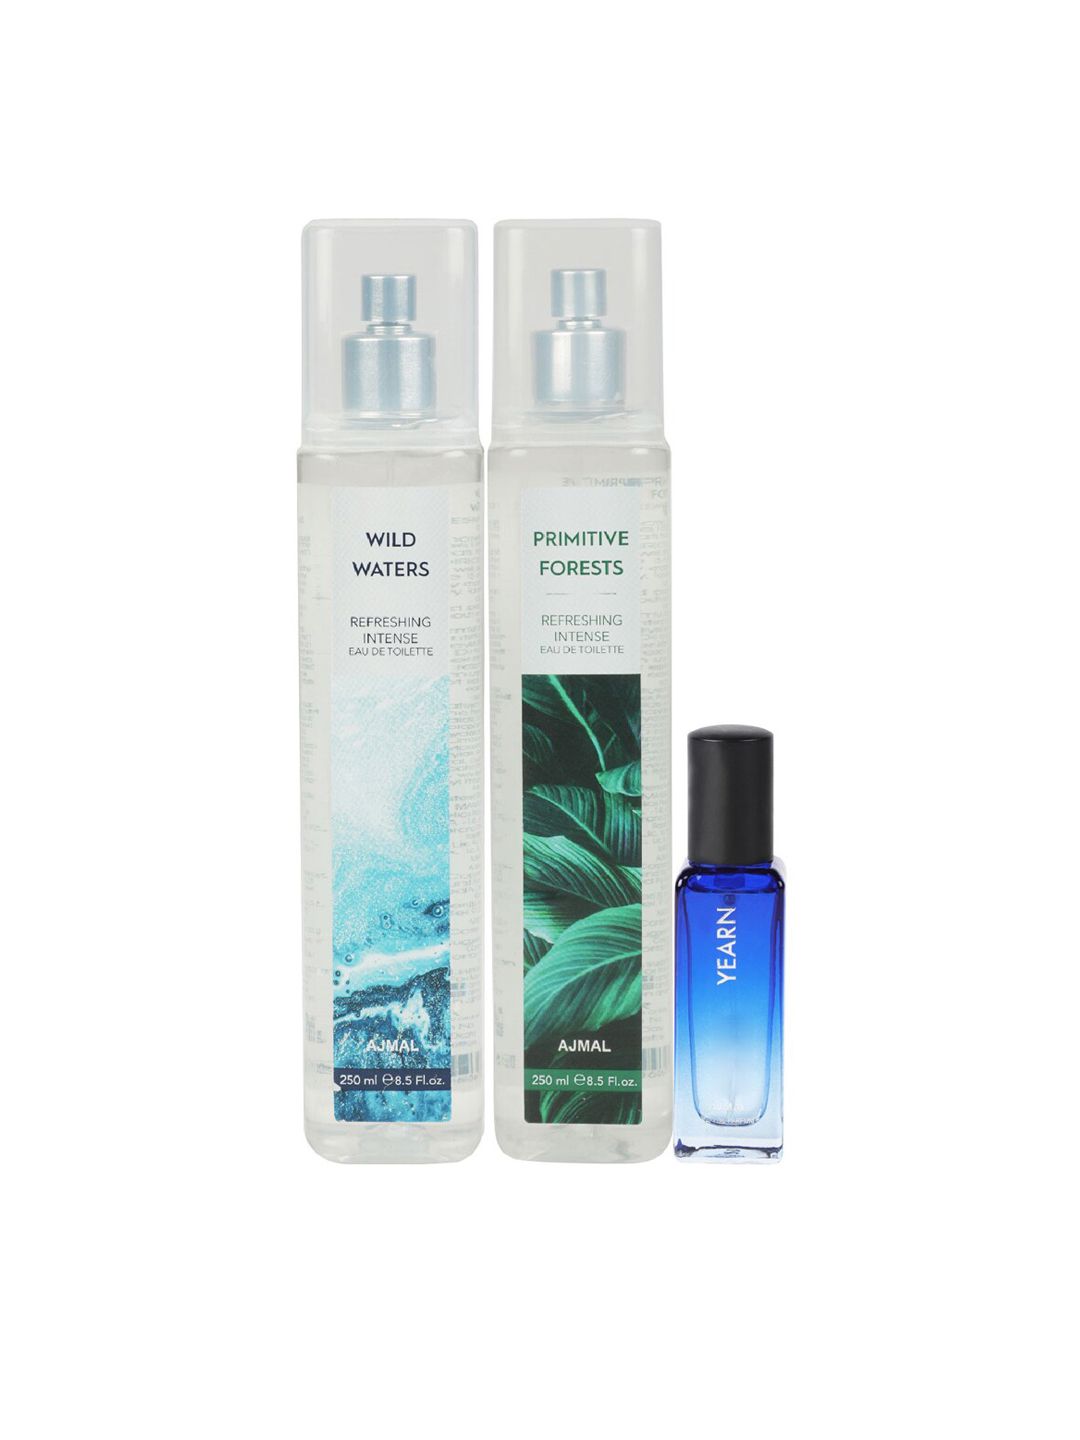 Ajmal Set of Wild Waters & Primitive Forest Eau De Toilette 250 ml each - Yearn EDP 20 ml Price in India